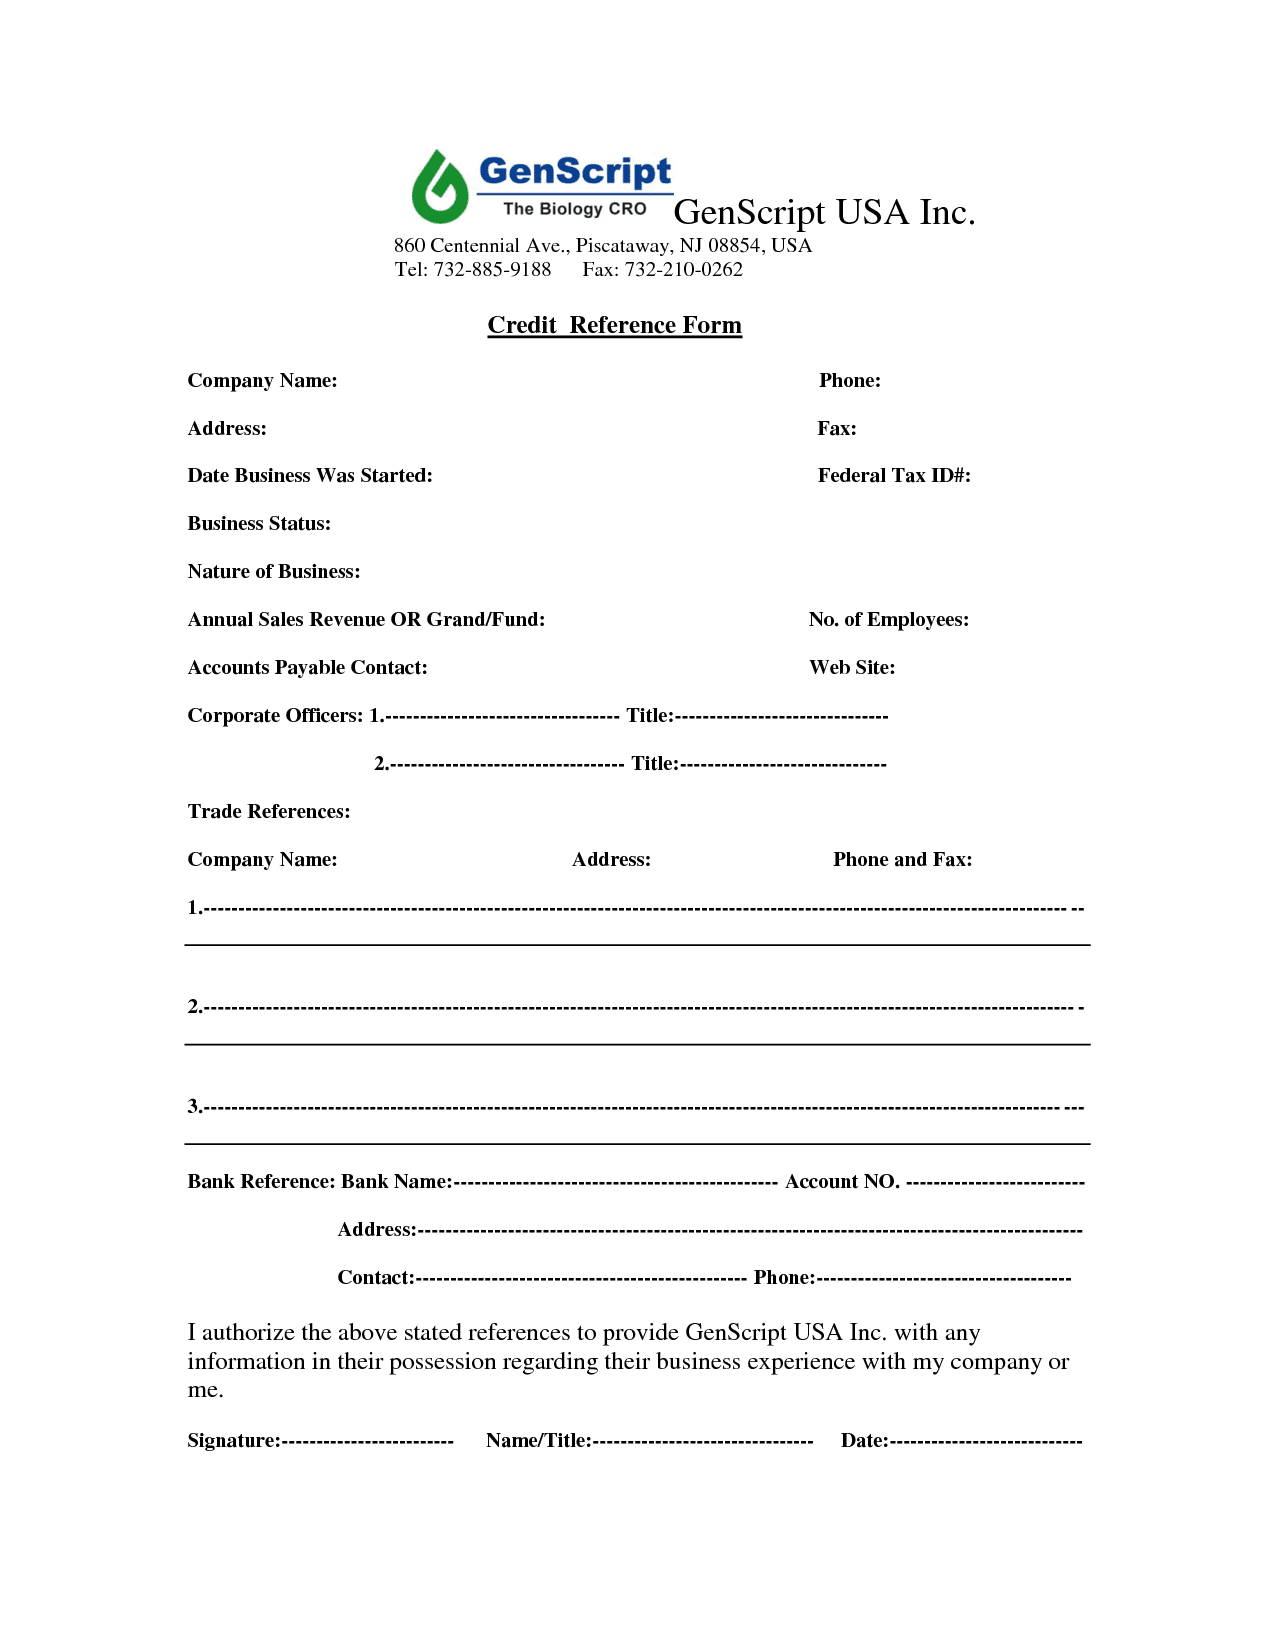 Credit Reference Form Template